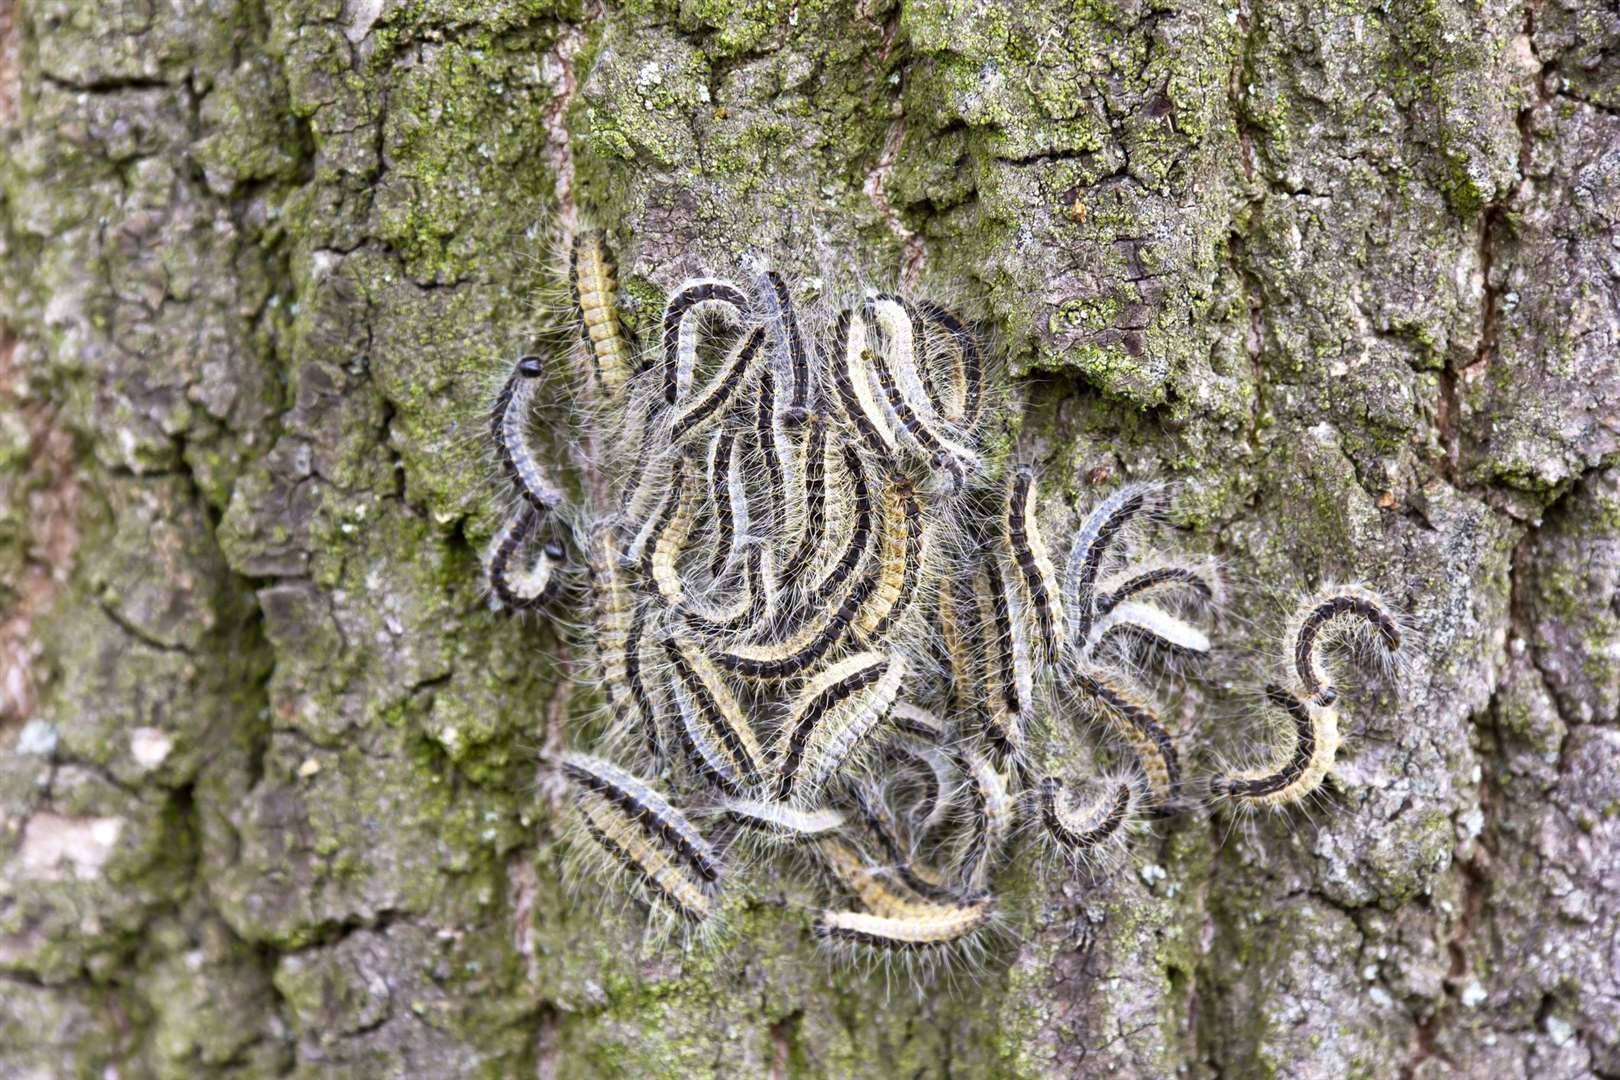 Oak processionary moth caterpillars contain hairs that are a danger to the public and pets